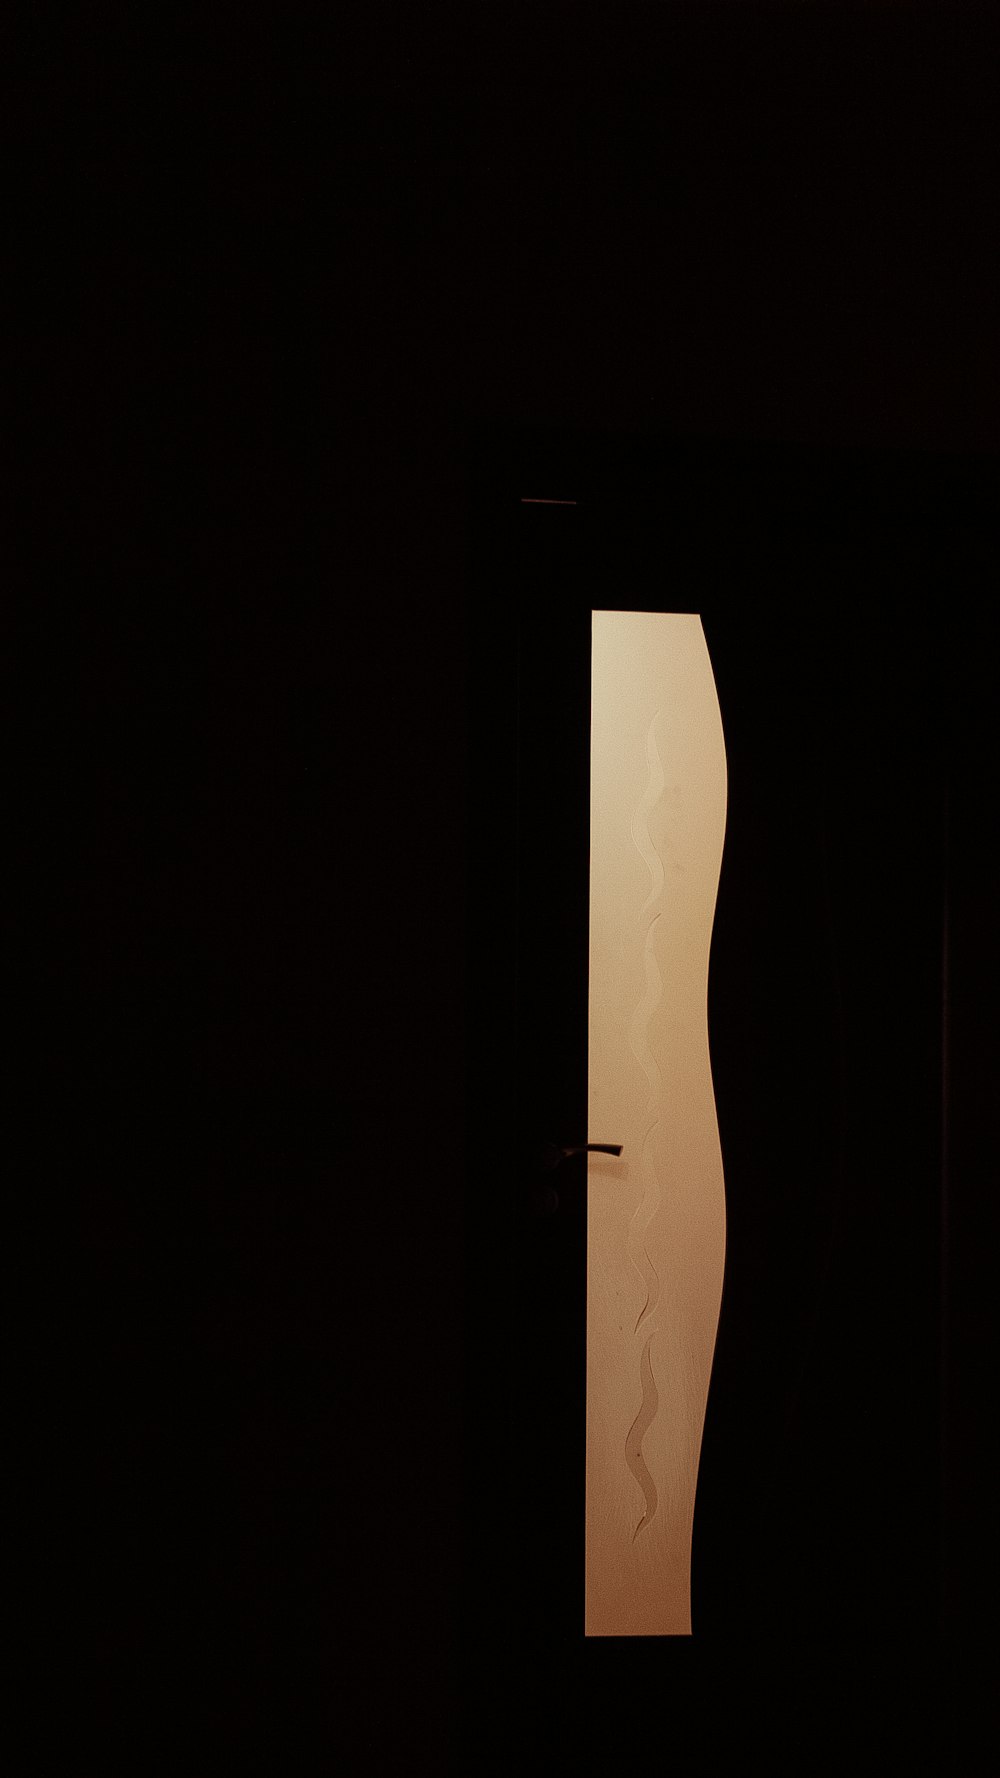 a silhouette of a person standing in a doorway